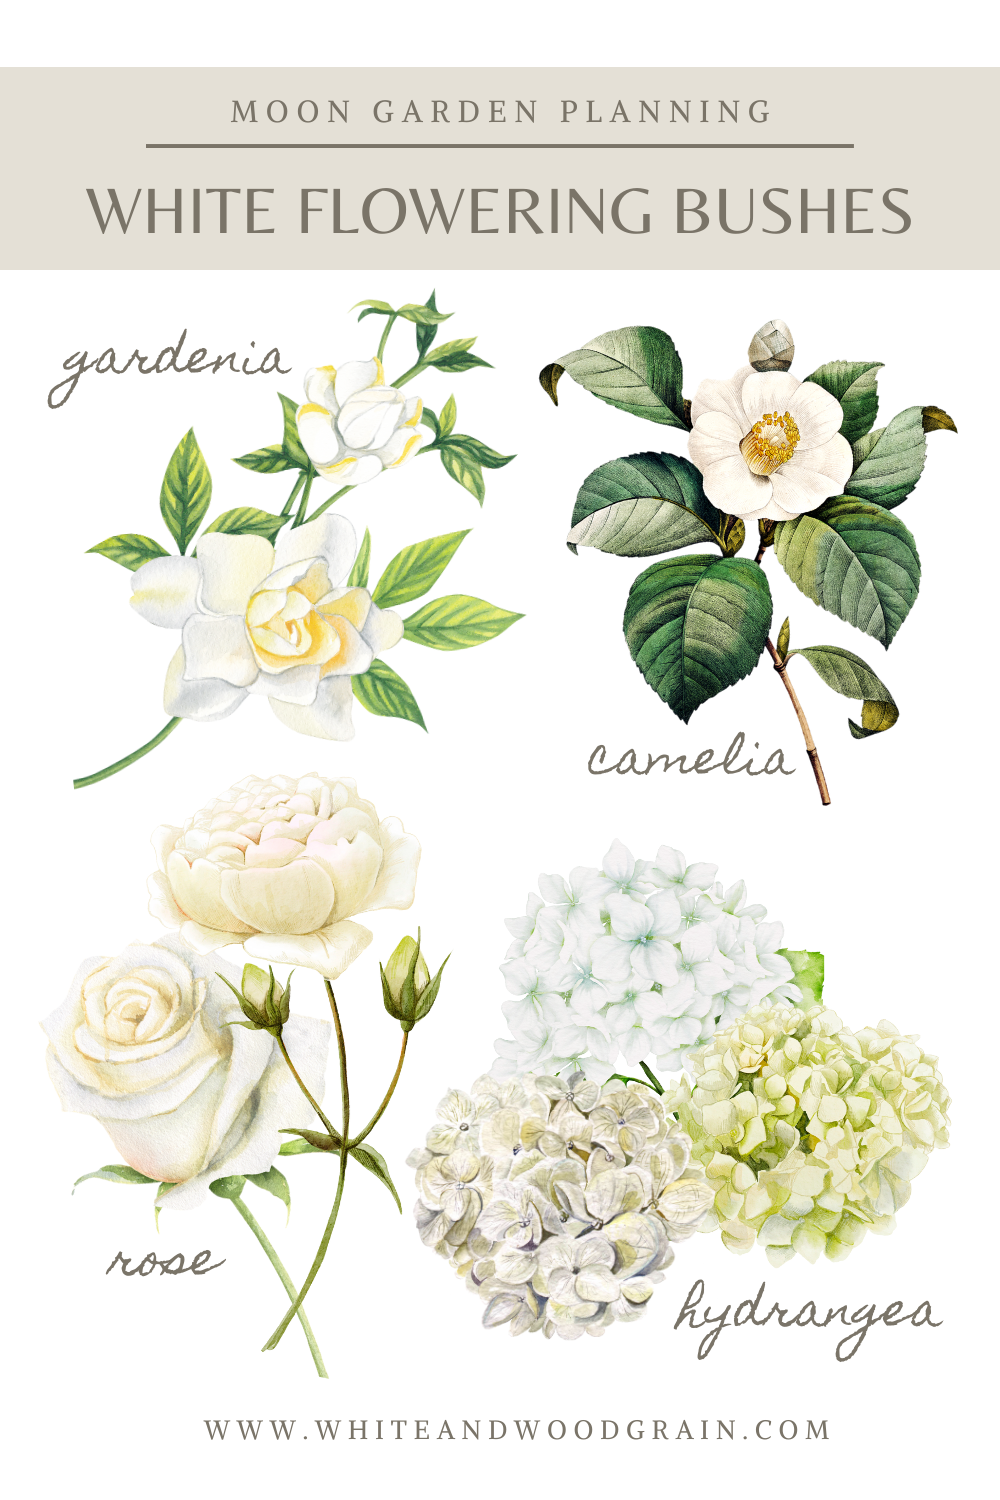 white flowering shrubs to consider when planning a moon garden - gardenia, camelia, roses, and hydrangreas